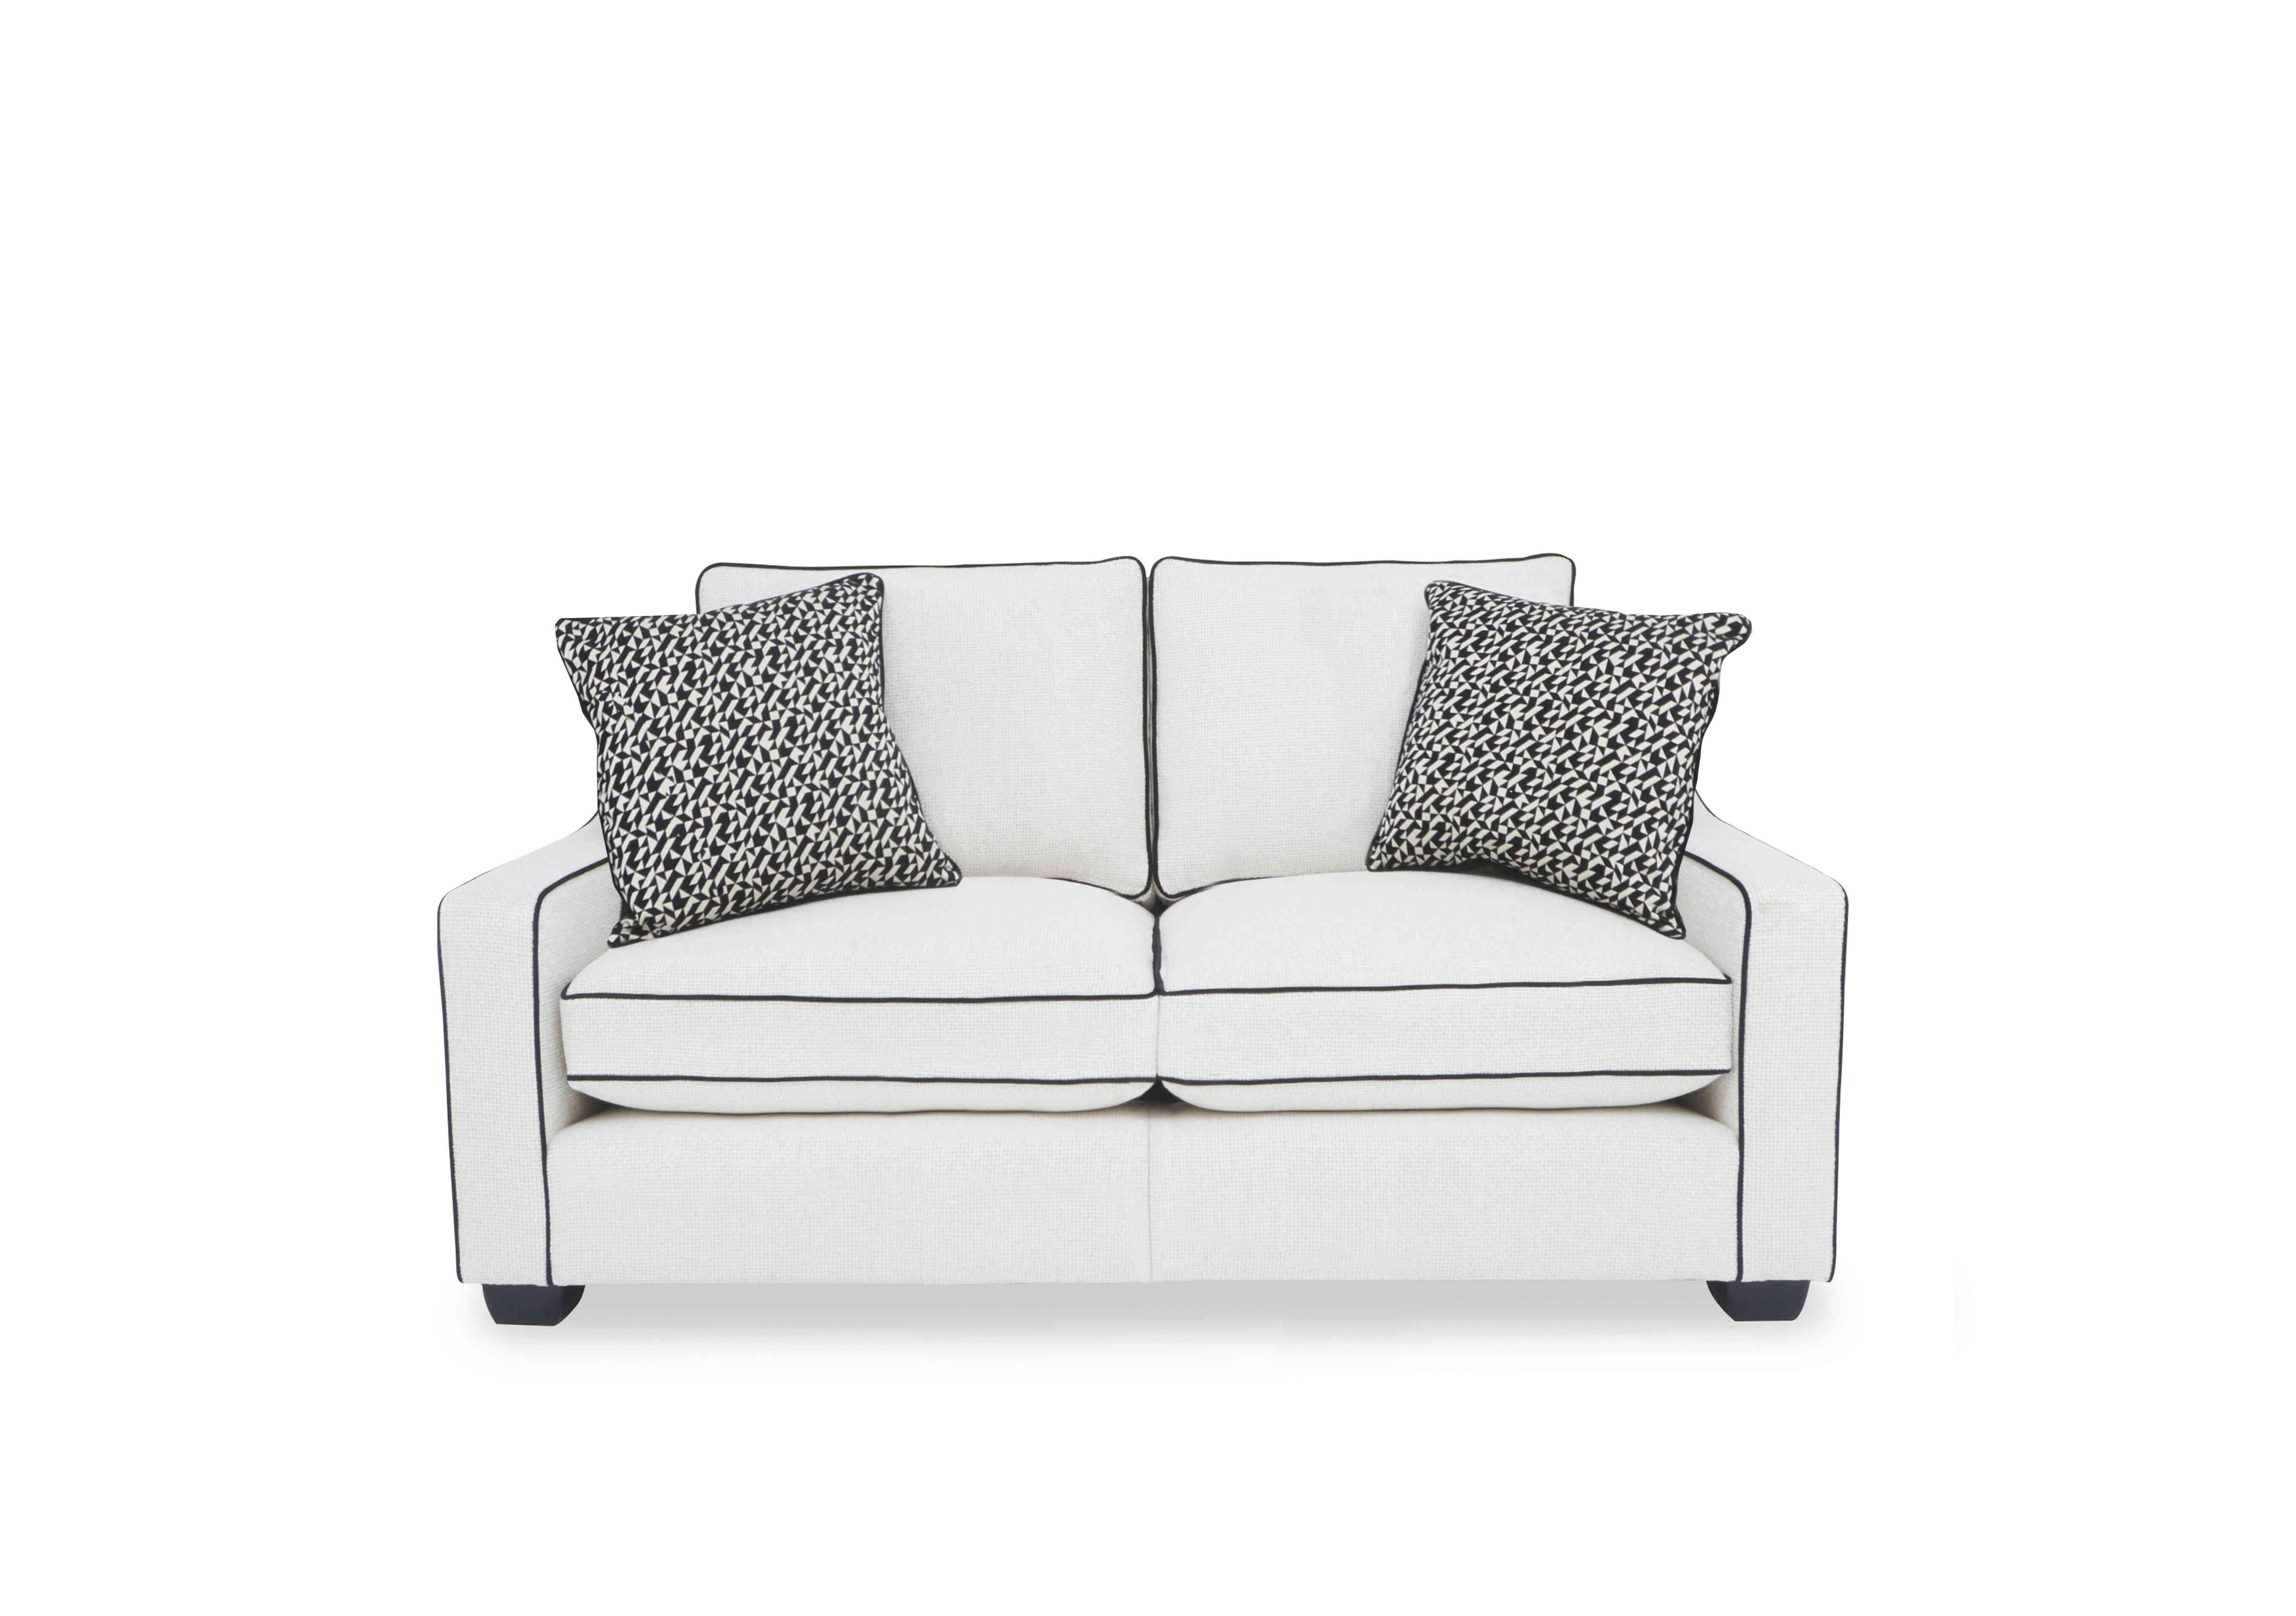 Celine 2 Seater Sofa in Tuzzi Ivory Mchrome Scat Eb Cp on Furniture Village